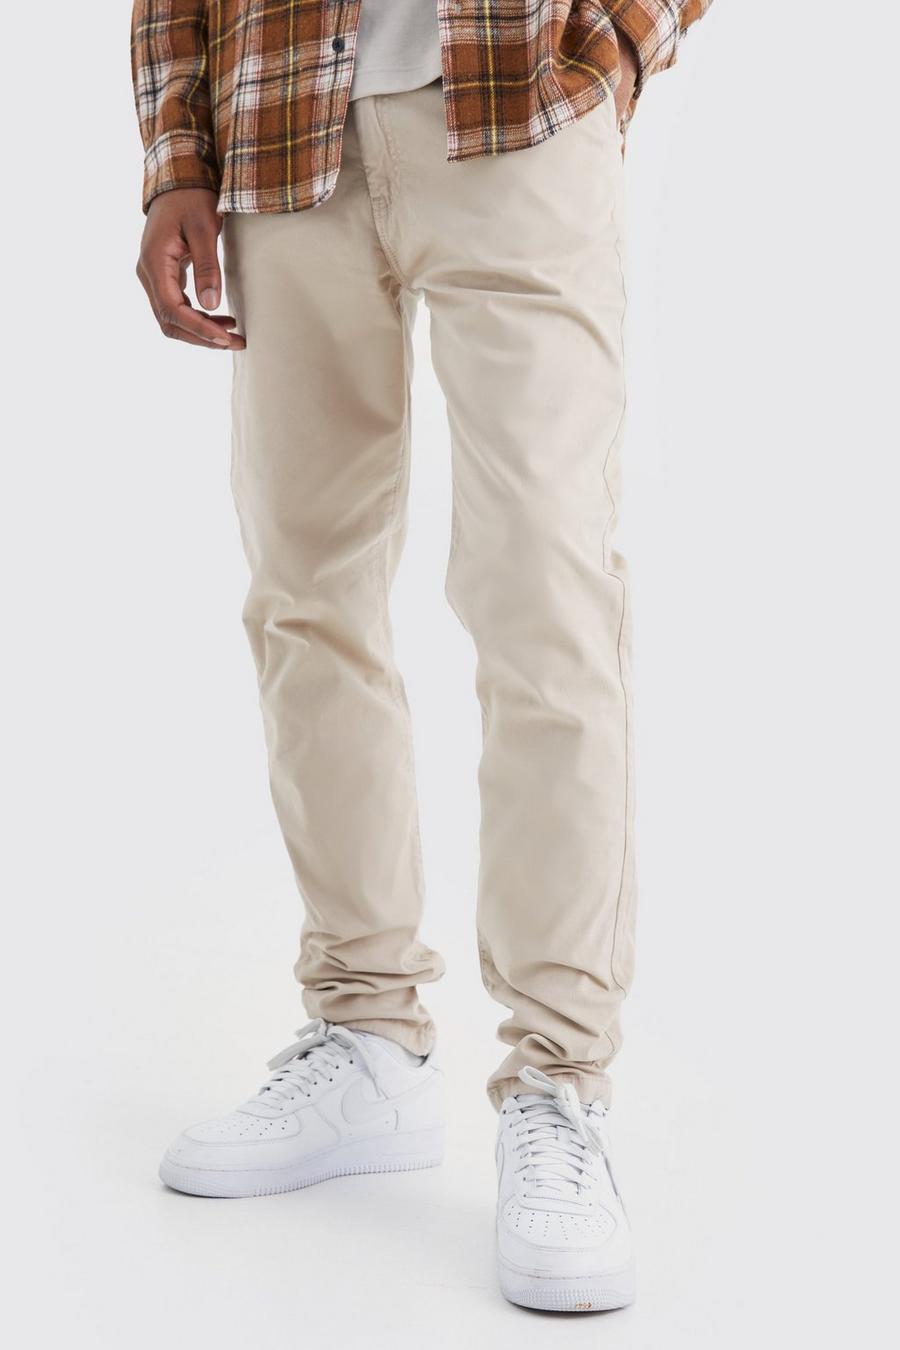 Stone Tall Slim Chino Pants With Woven Tab